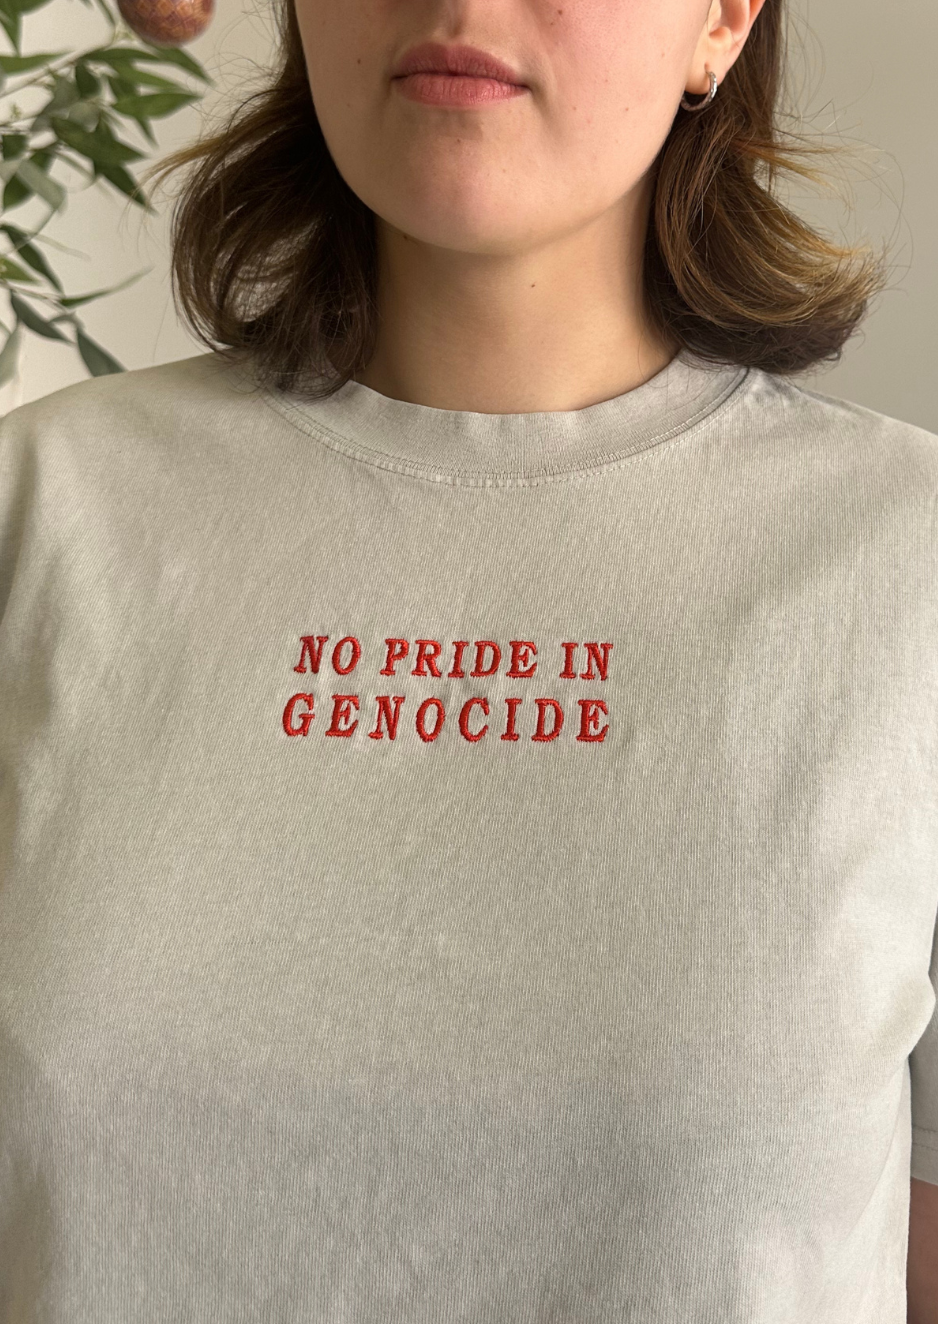 Clothing The Gaps. No Pride In Genocide Tee. Light grey cream t-shirt with 'No Pride In Genocide' embroidered in red all caps bold text on the front chest of t-shirt.